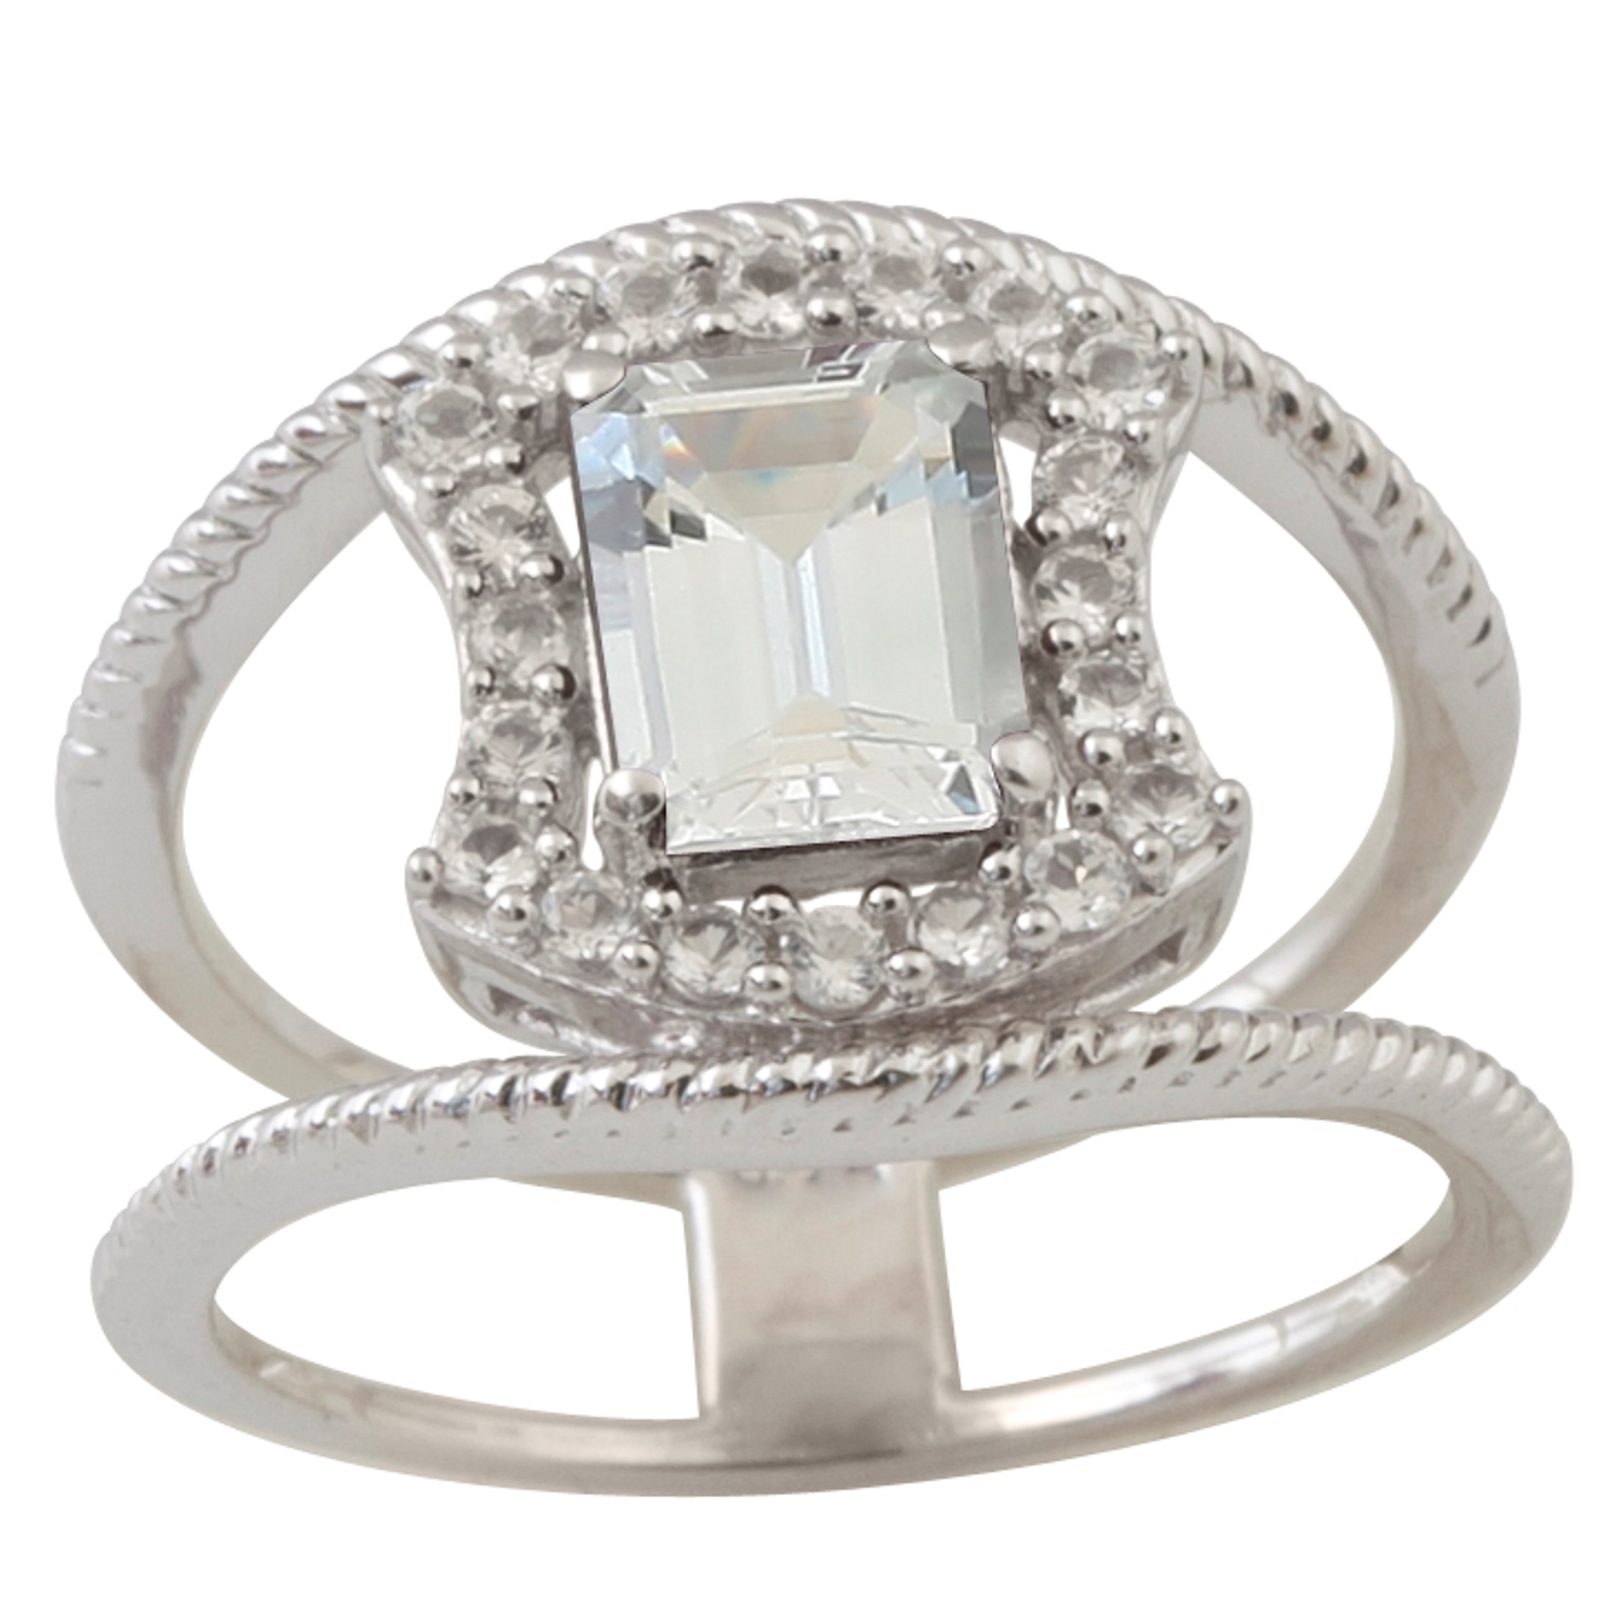 Sterling Silver Ring with White Topaz 8x6 Octagon Shape Stone